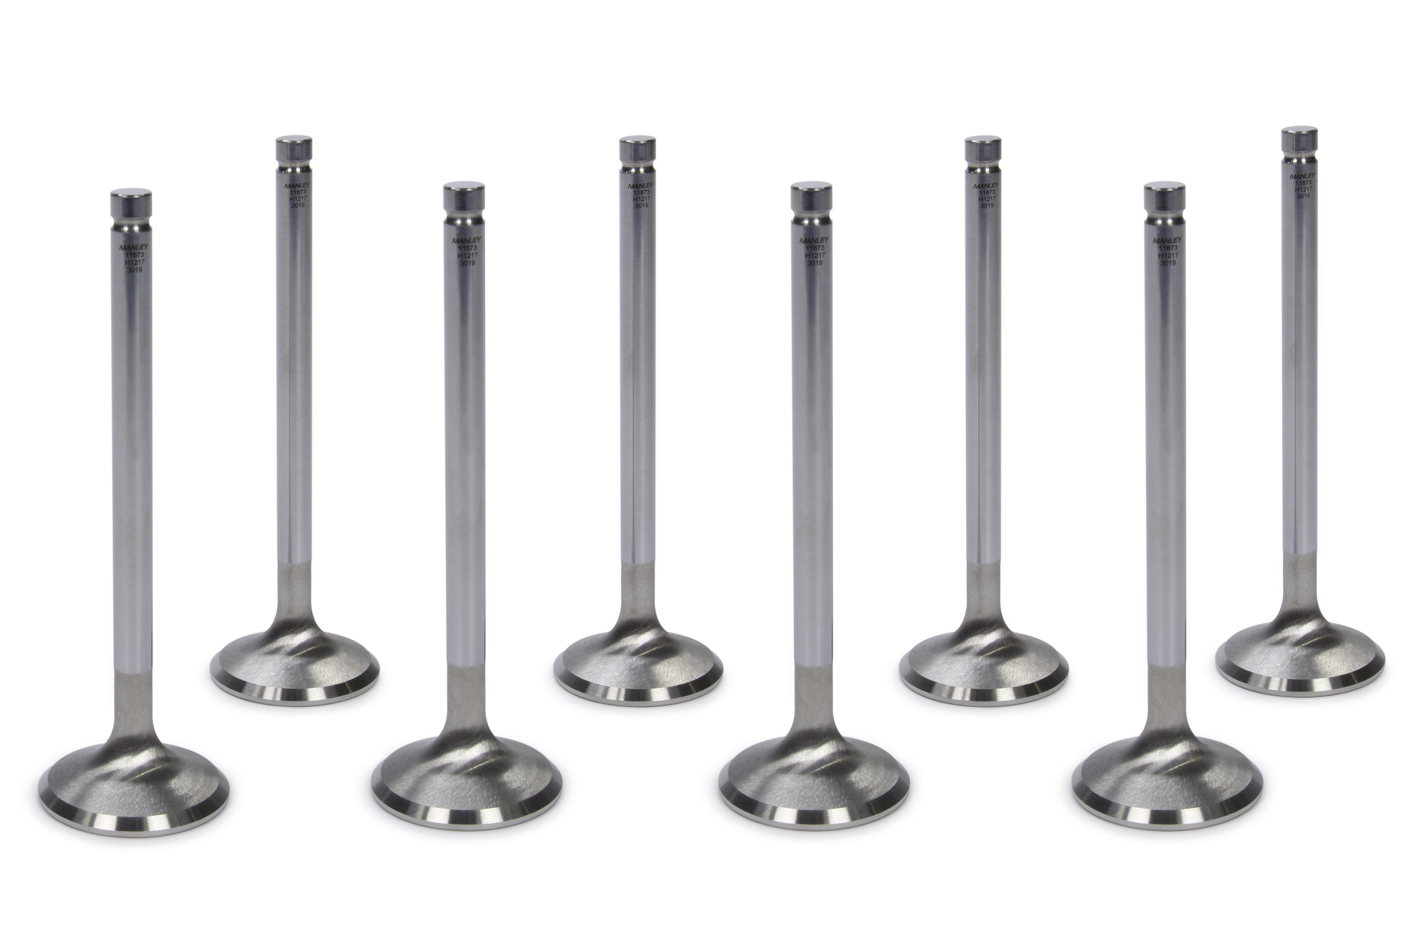 Manley 10761-8 Exhaust Valve, Street Master, 1.880 in Head, 11/32 in Valve Stem, 5.522 in Long, Stainless, Big Block Chevy, Set of 8